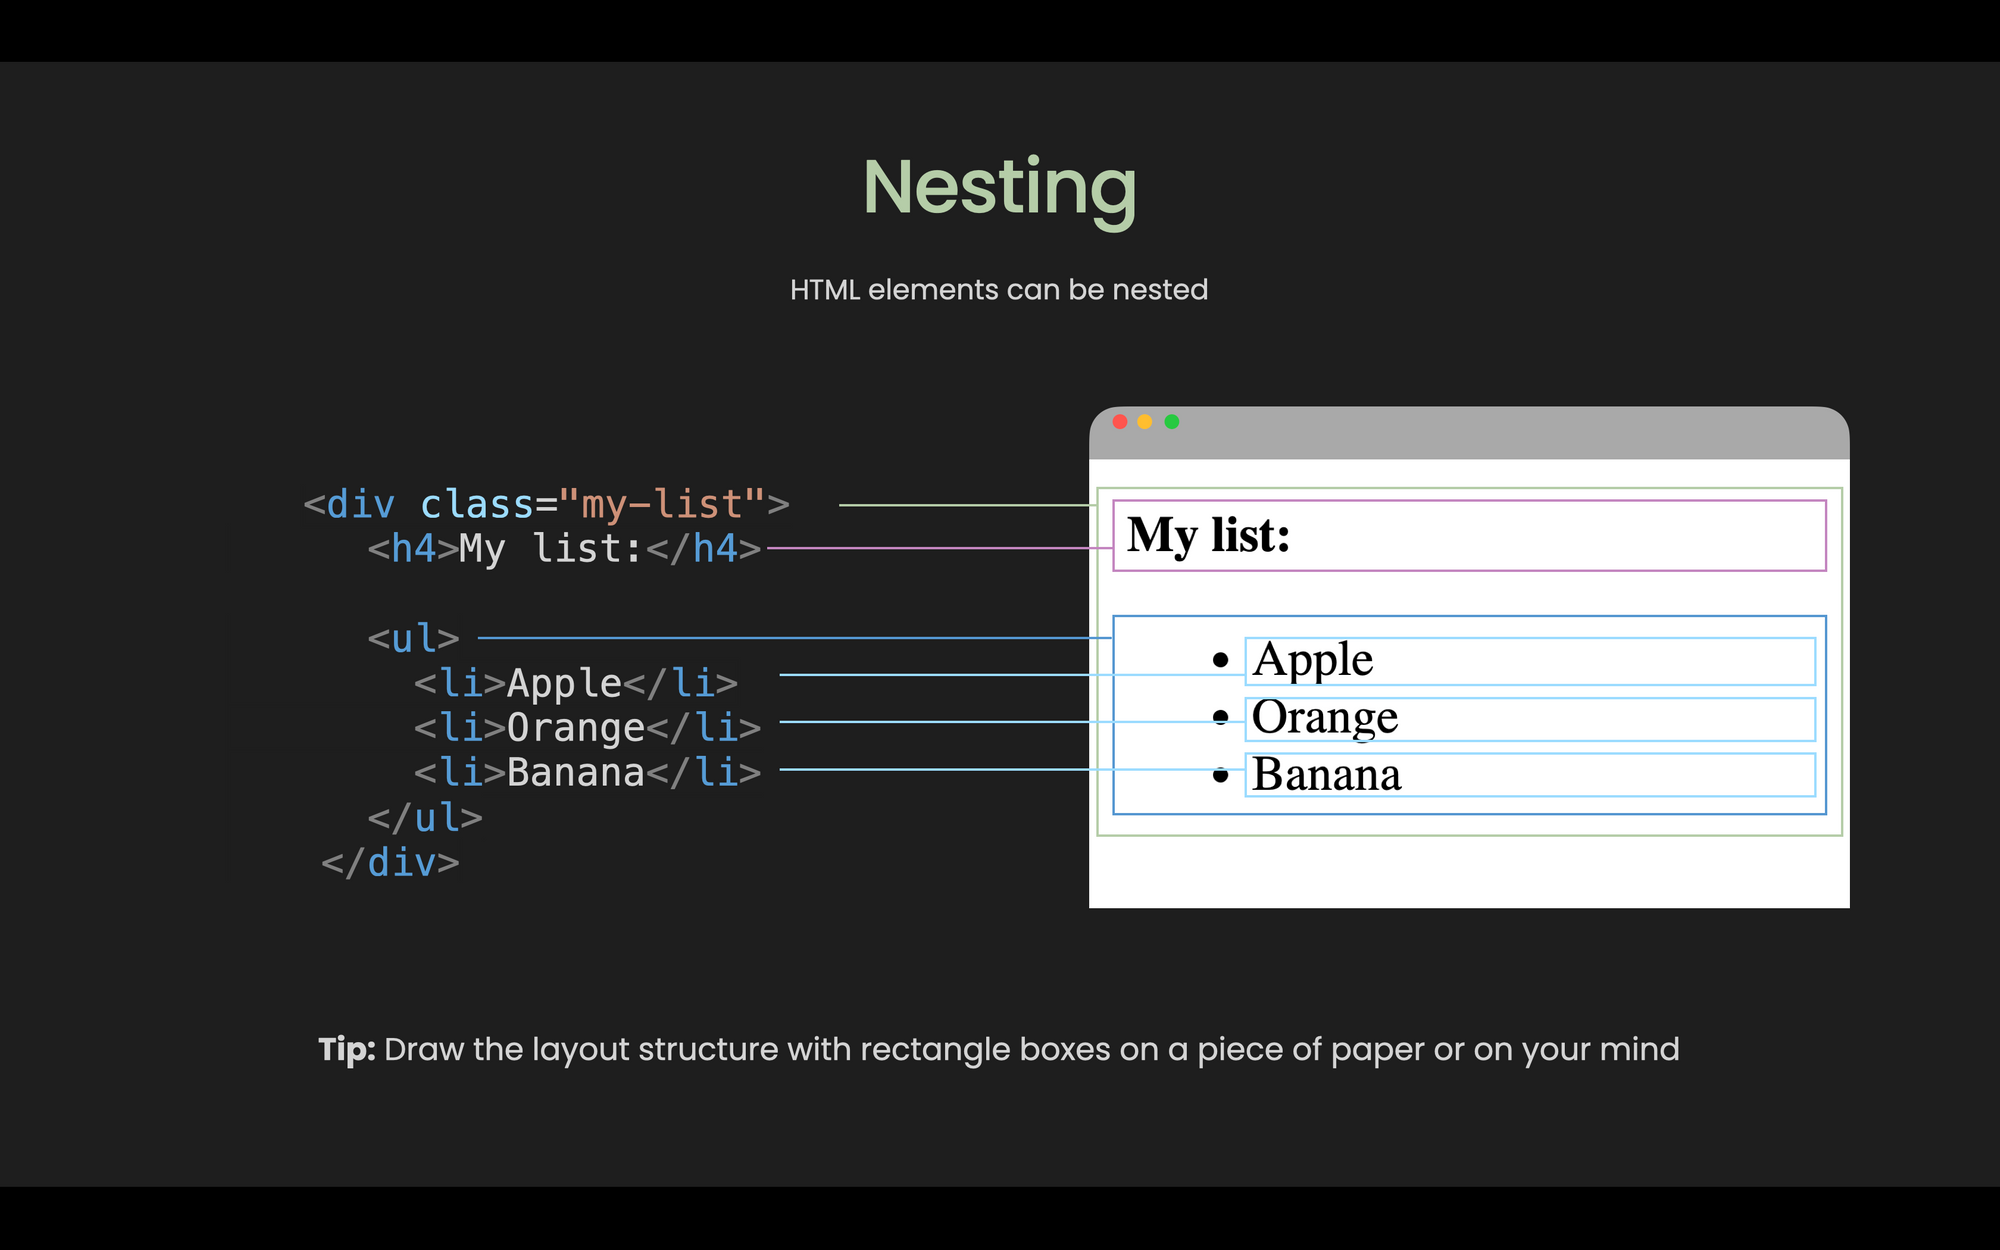 How to Nest HTML Elements